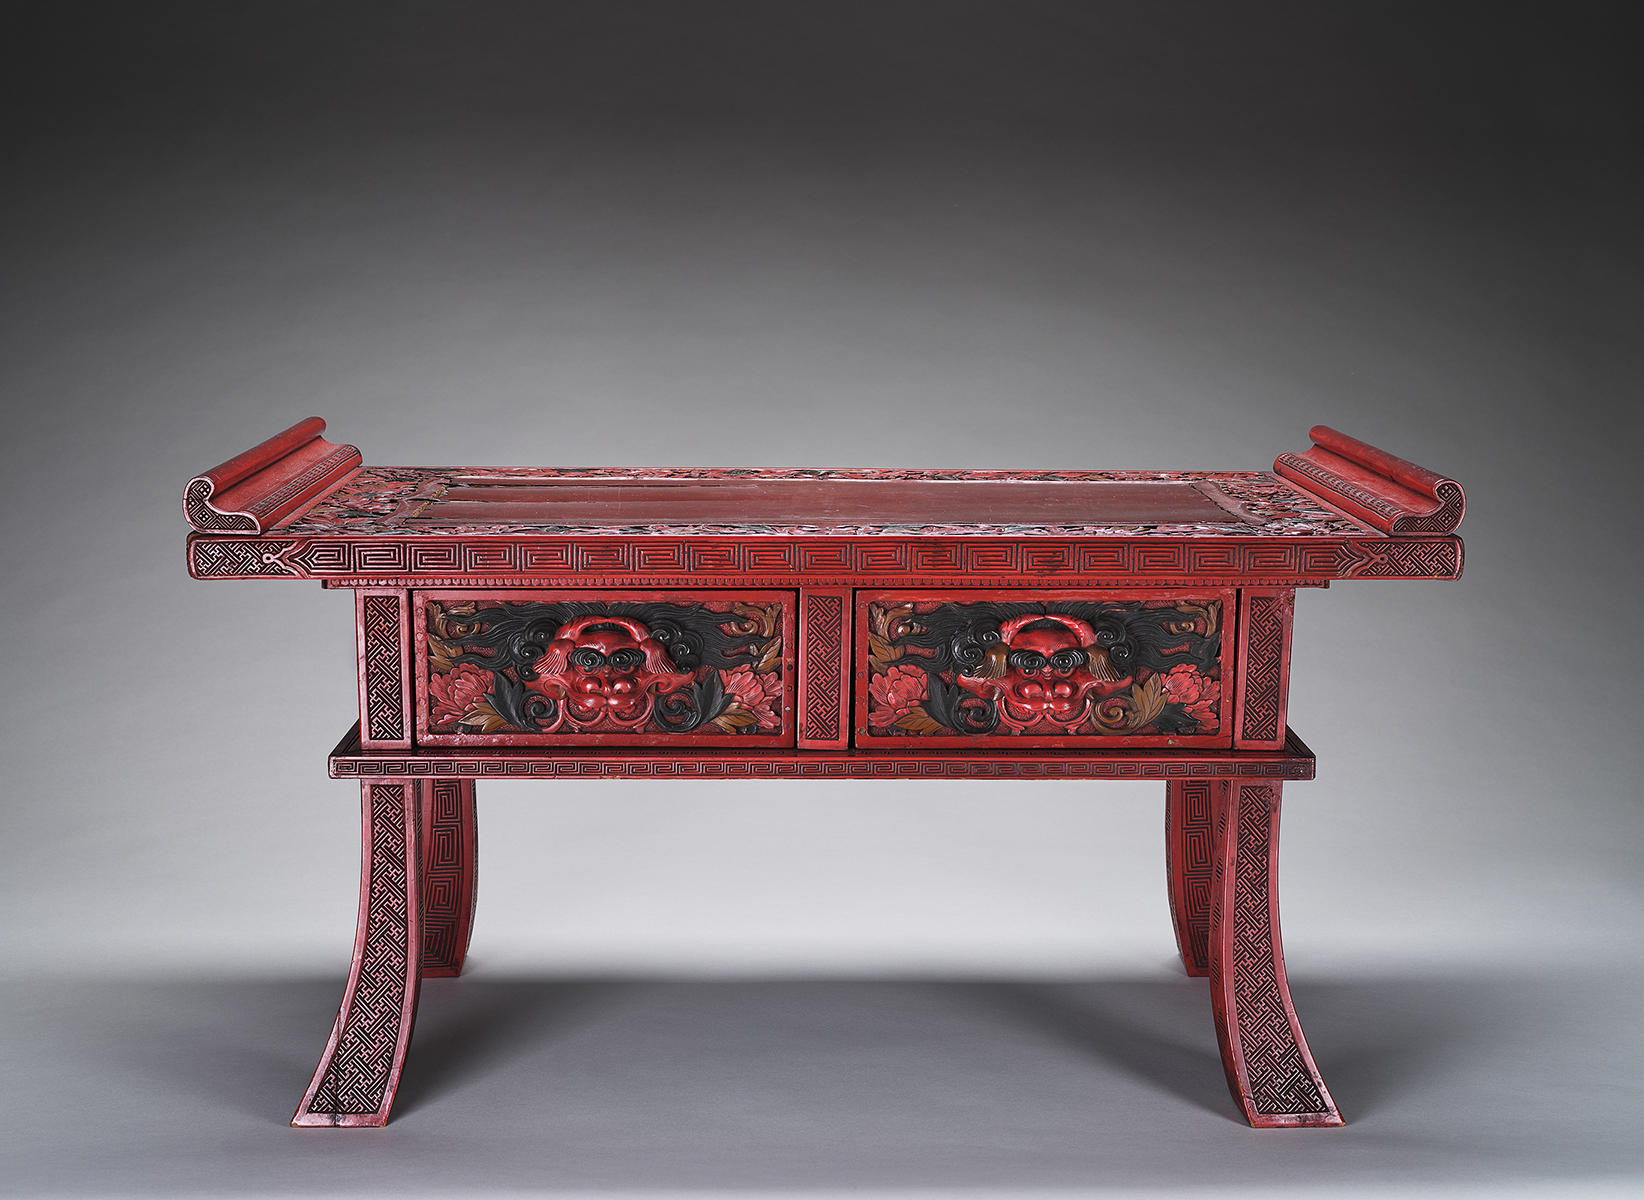 Japanese, Table, late 19th century–early 20th century. Lacquered wood